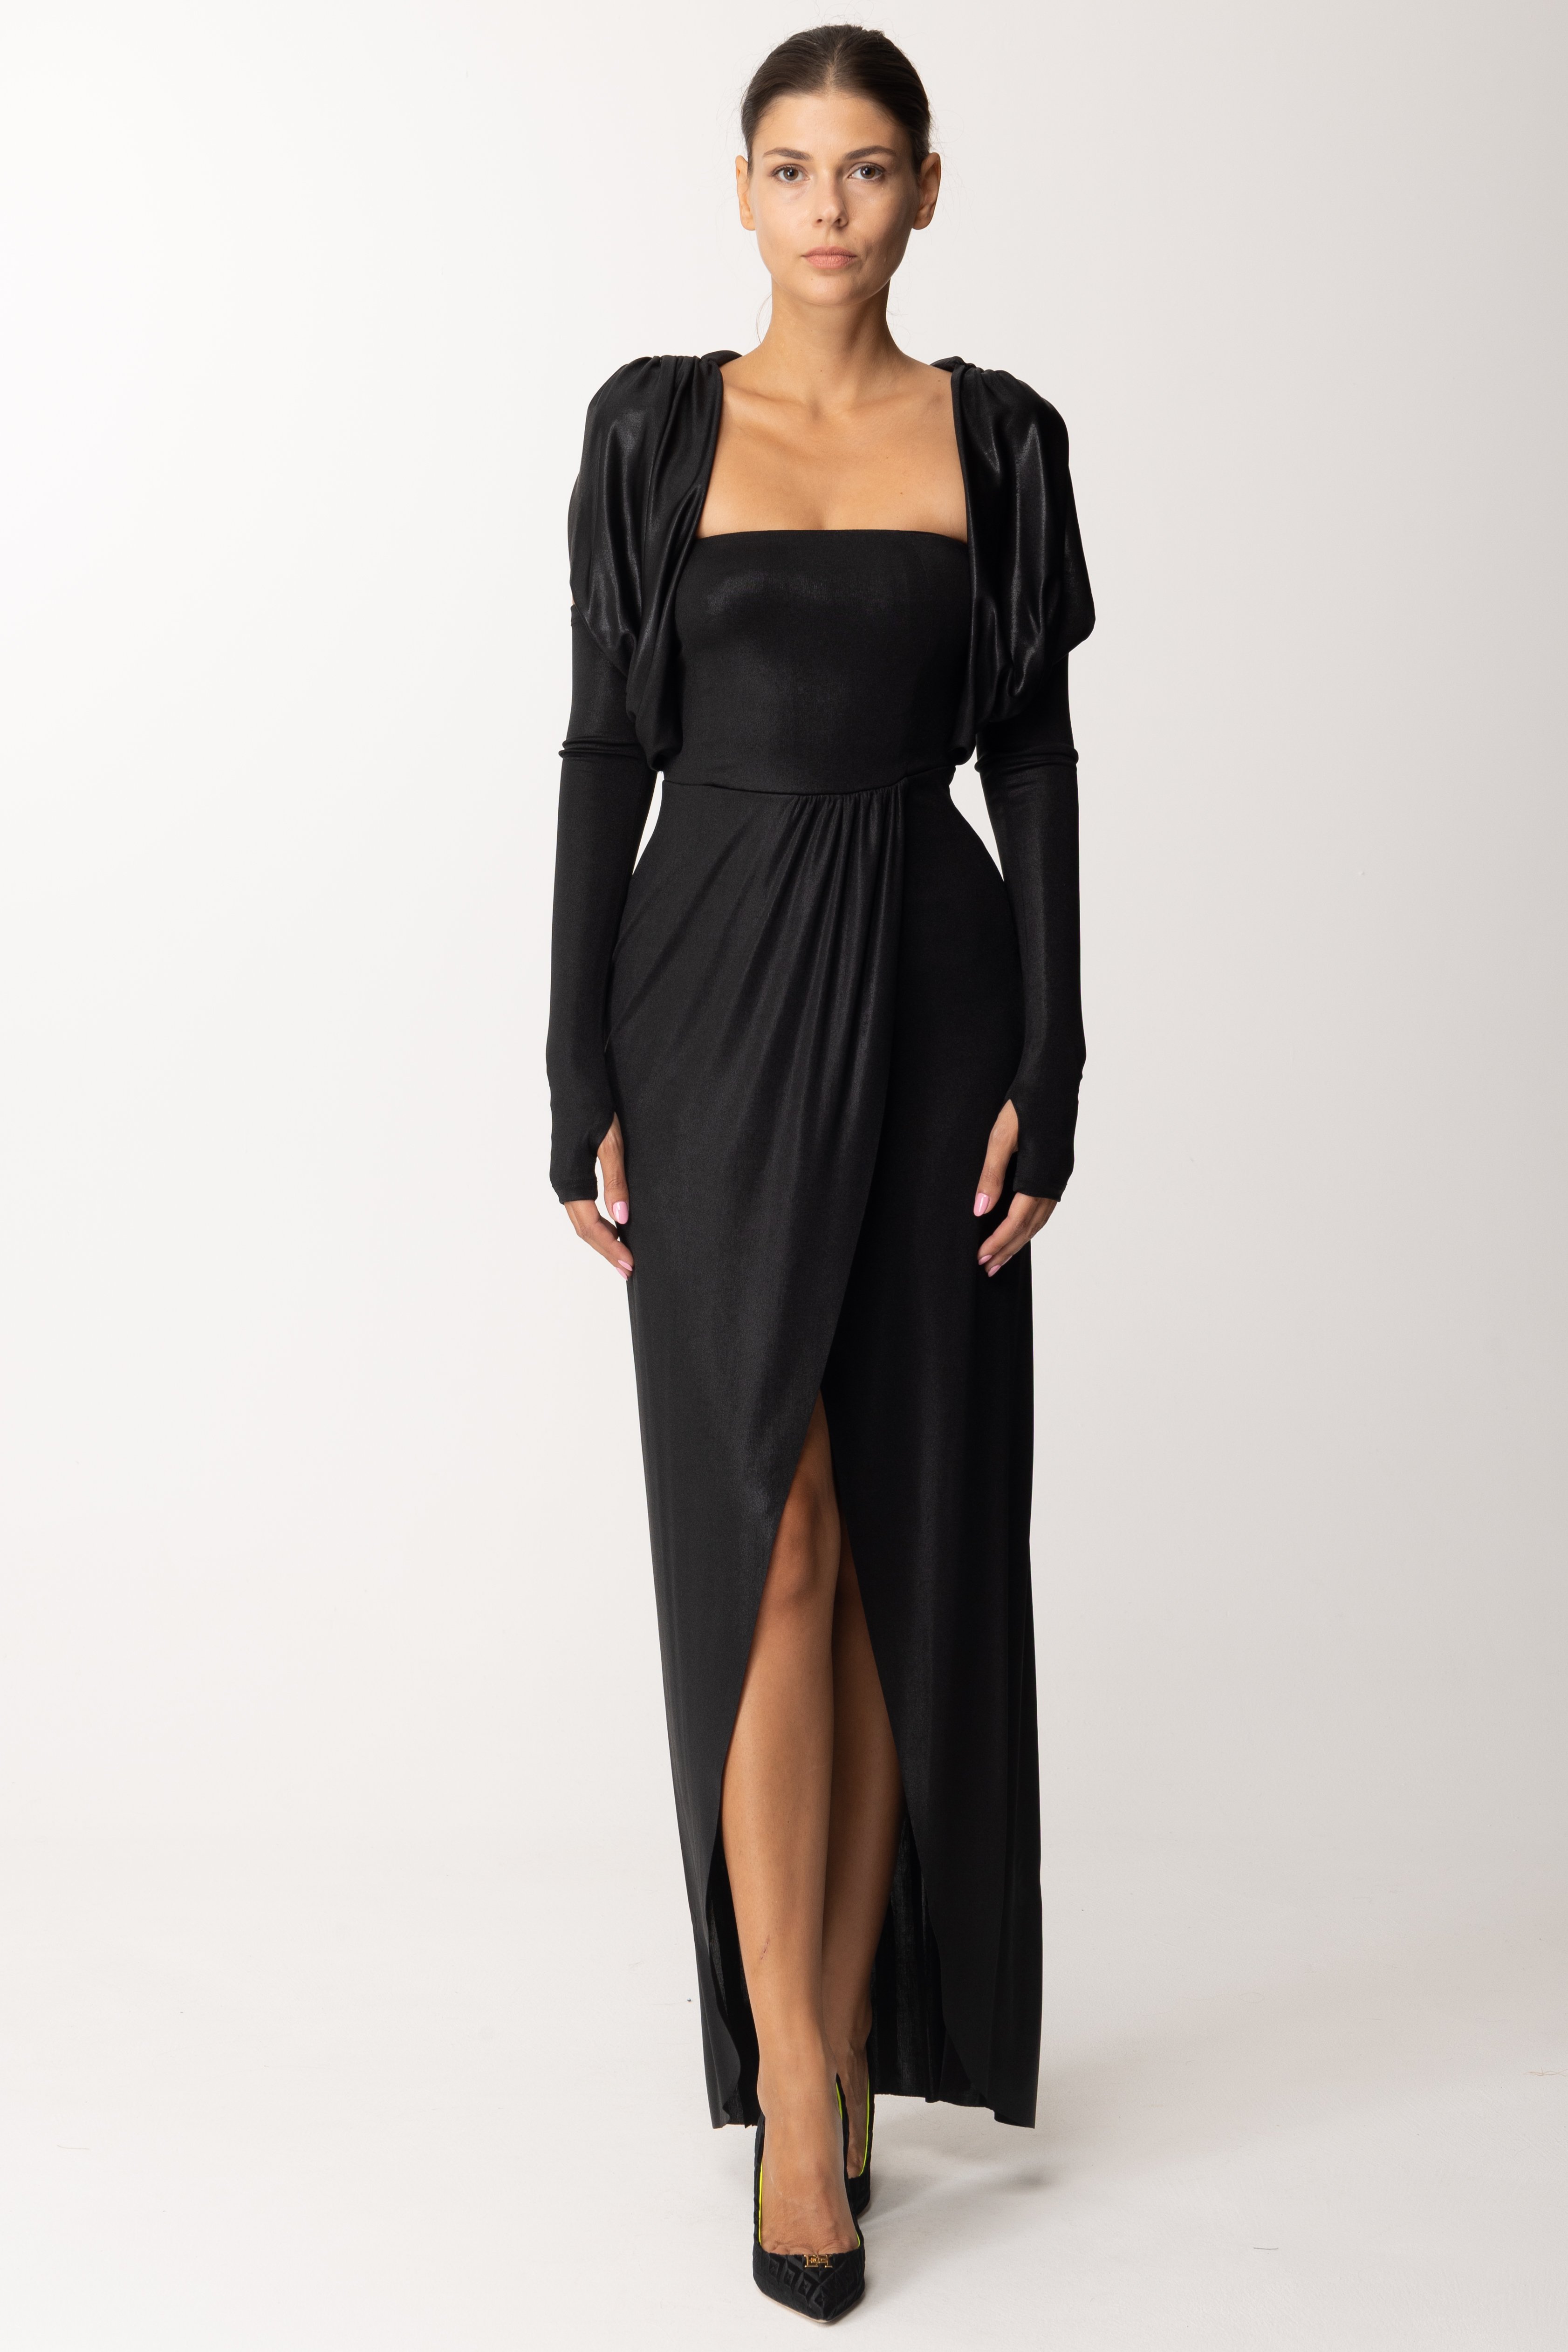 Preview: Dramèe Long Dress with Draped Sleeves and Inserts Nero